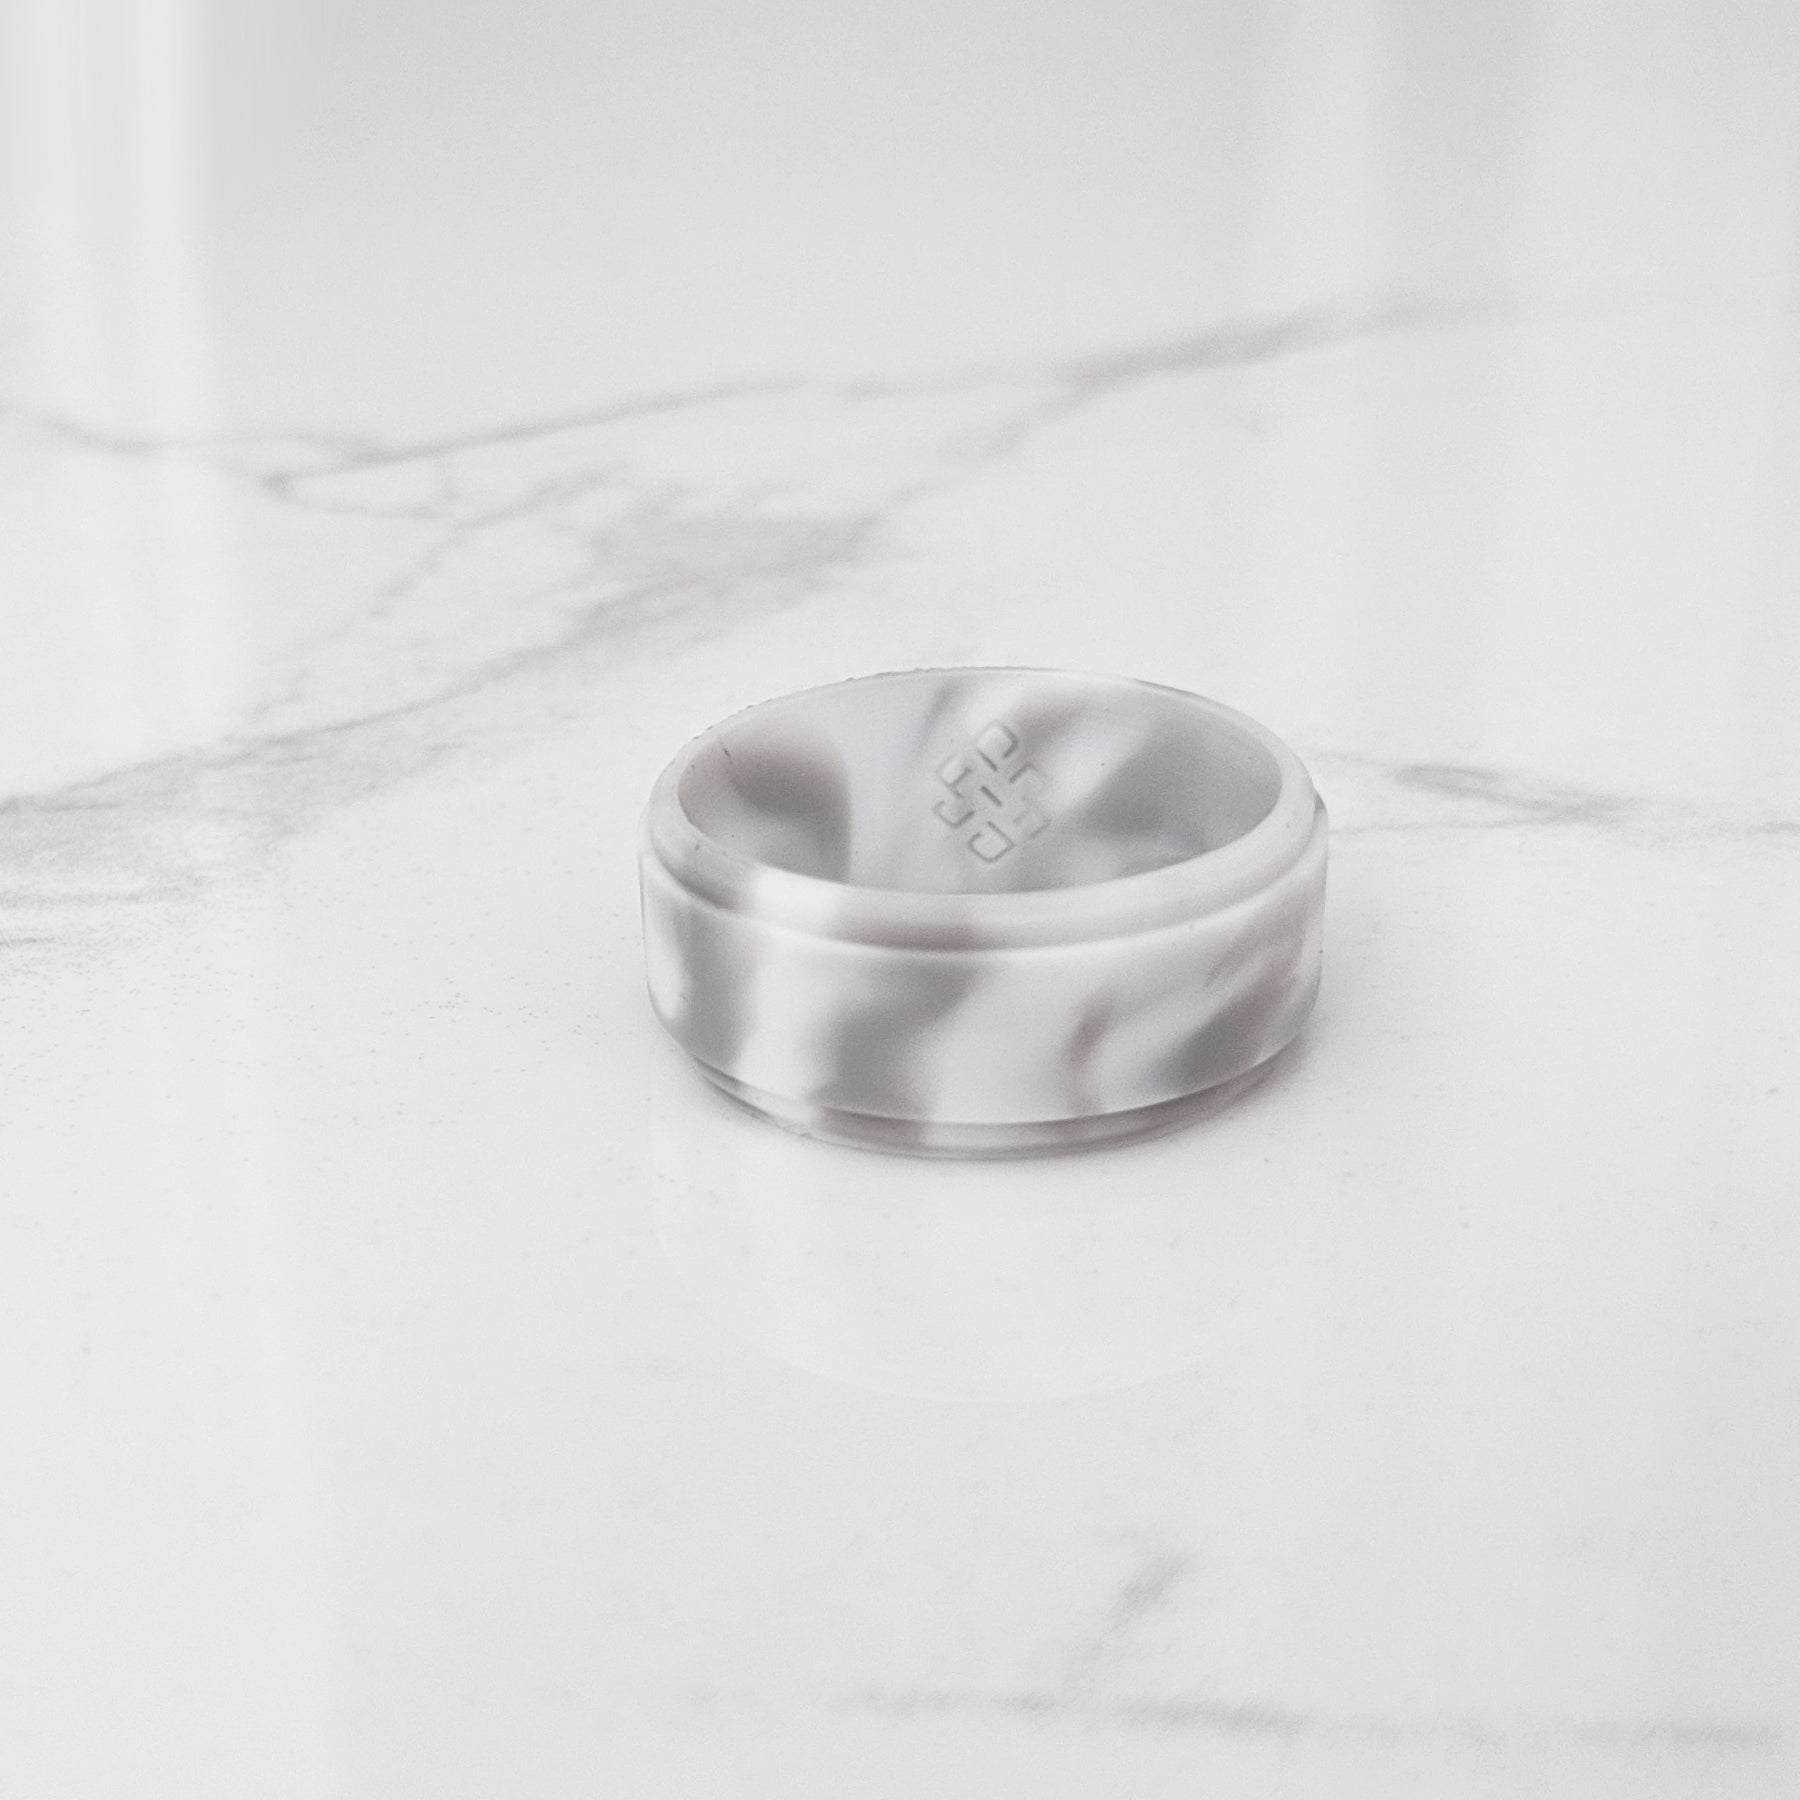 White Marble Step Edge Breathable Silicone Ring for Men - Knot Theory